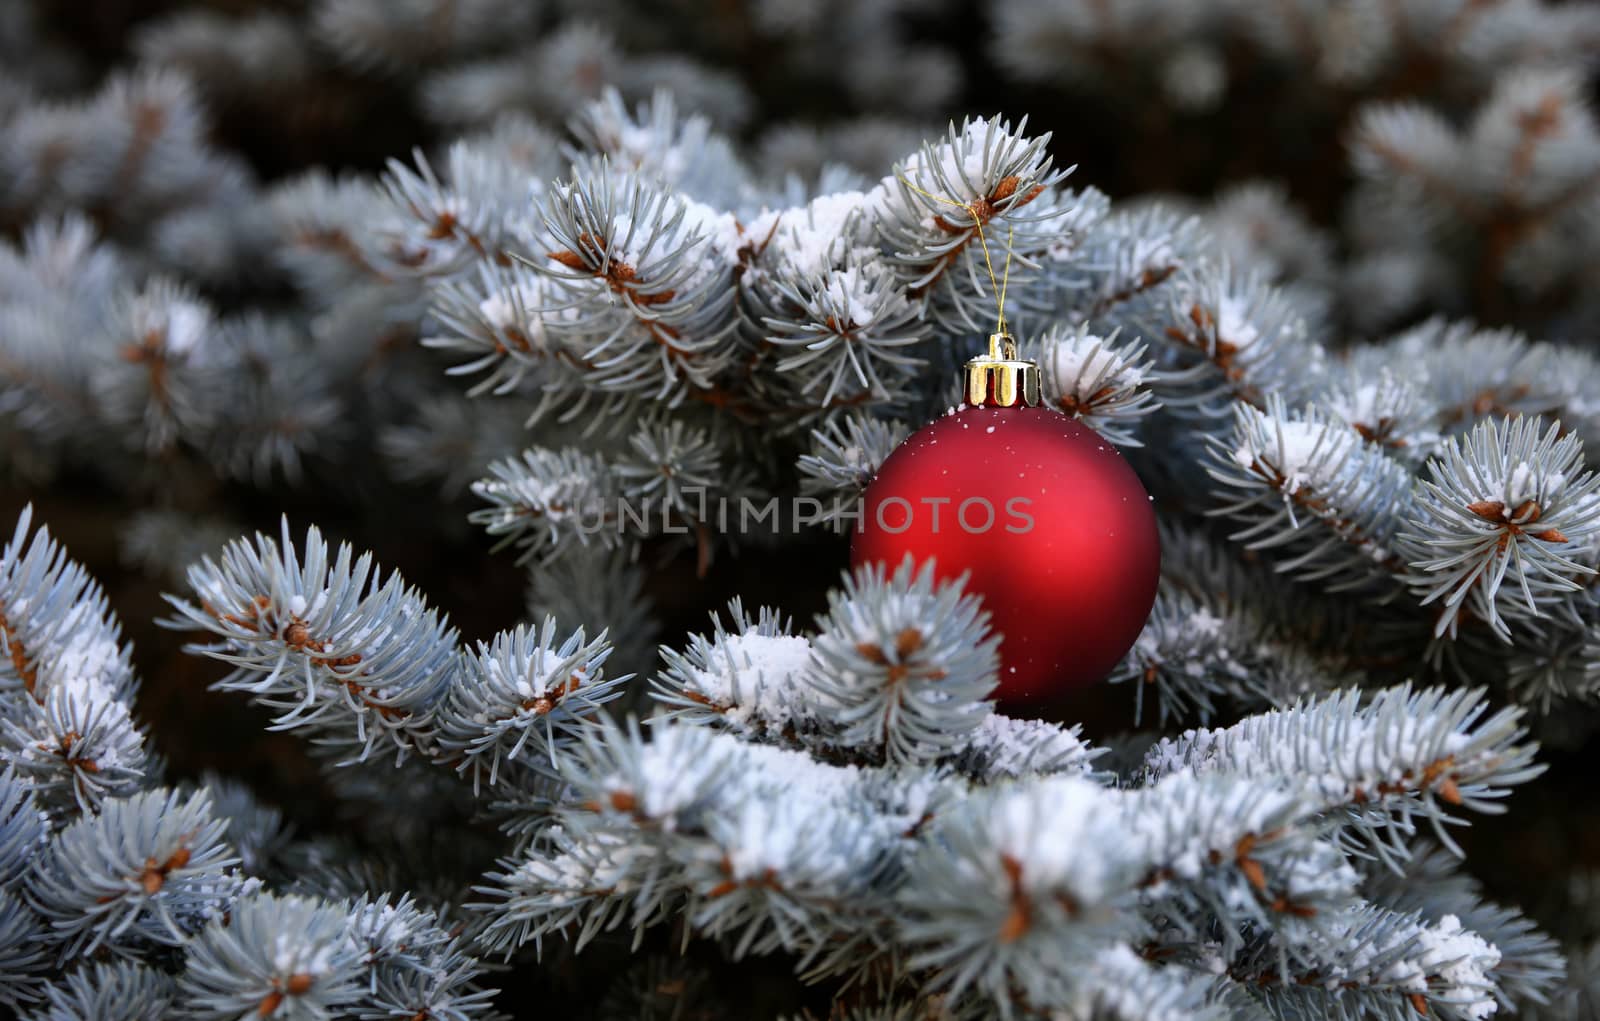 Real Blue spruce Christmas tree with red ornament and snow for the holiday season 